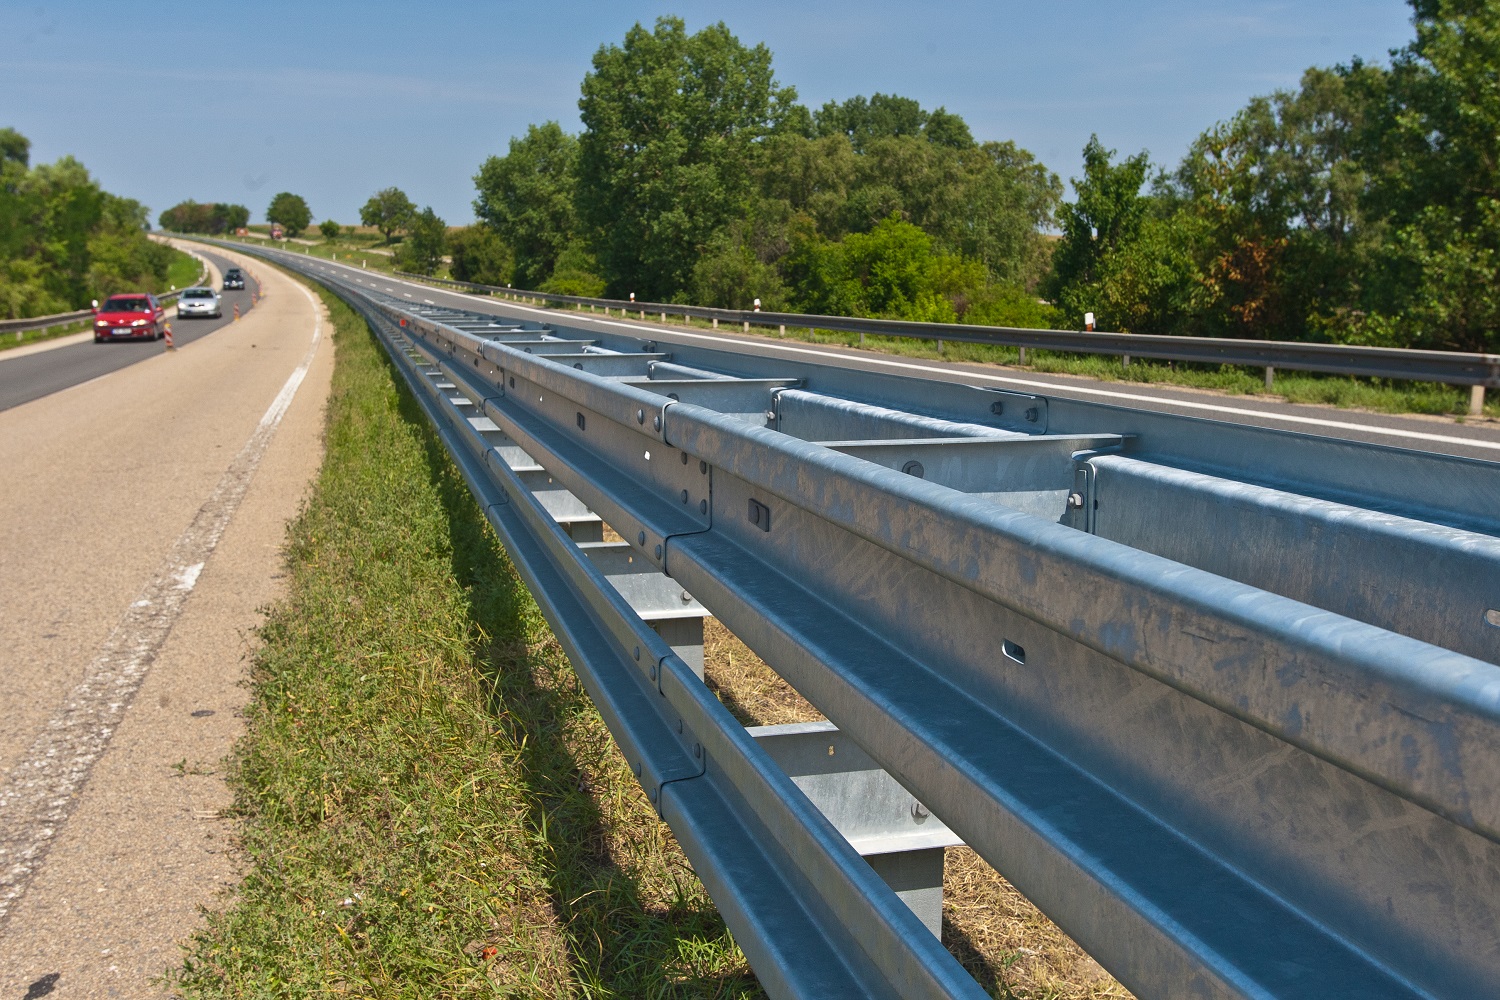 Liberty Ostrava successfully tested innovated safety barrier